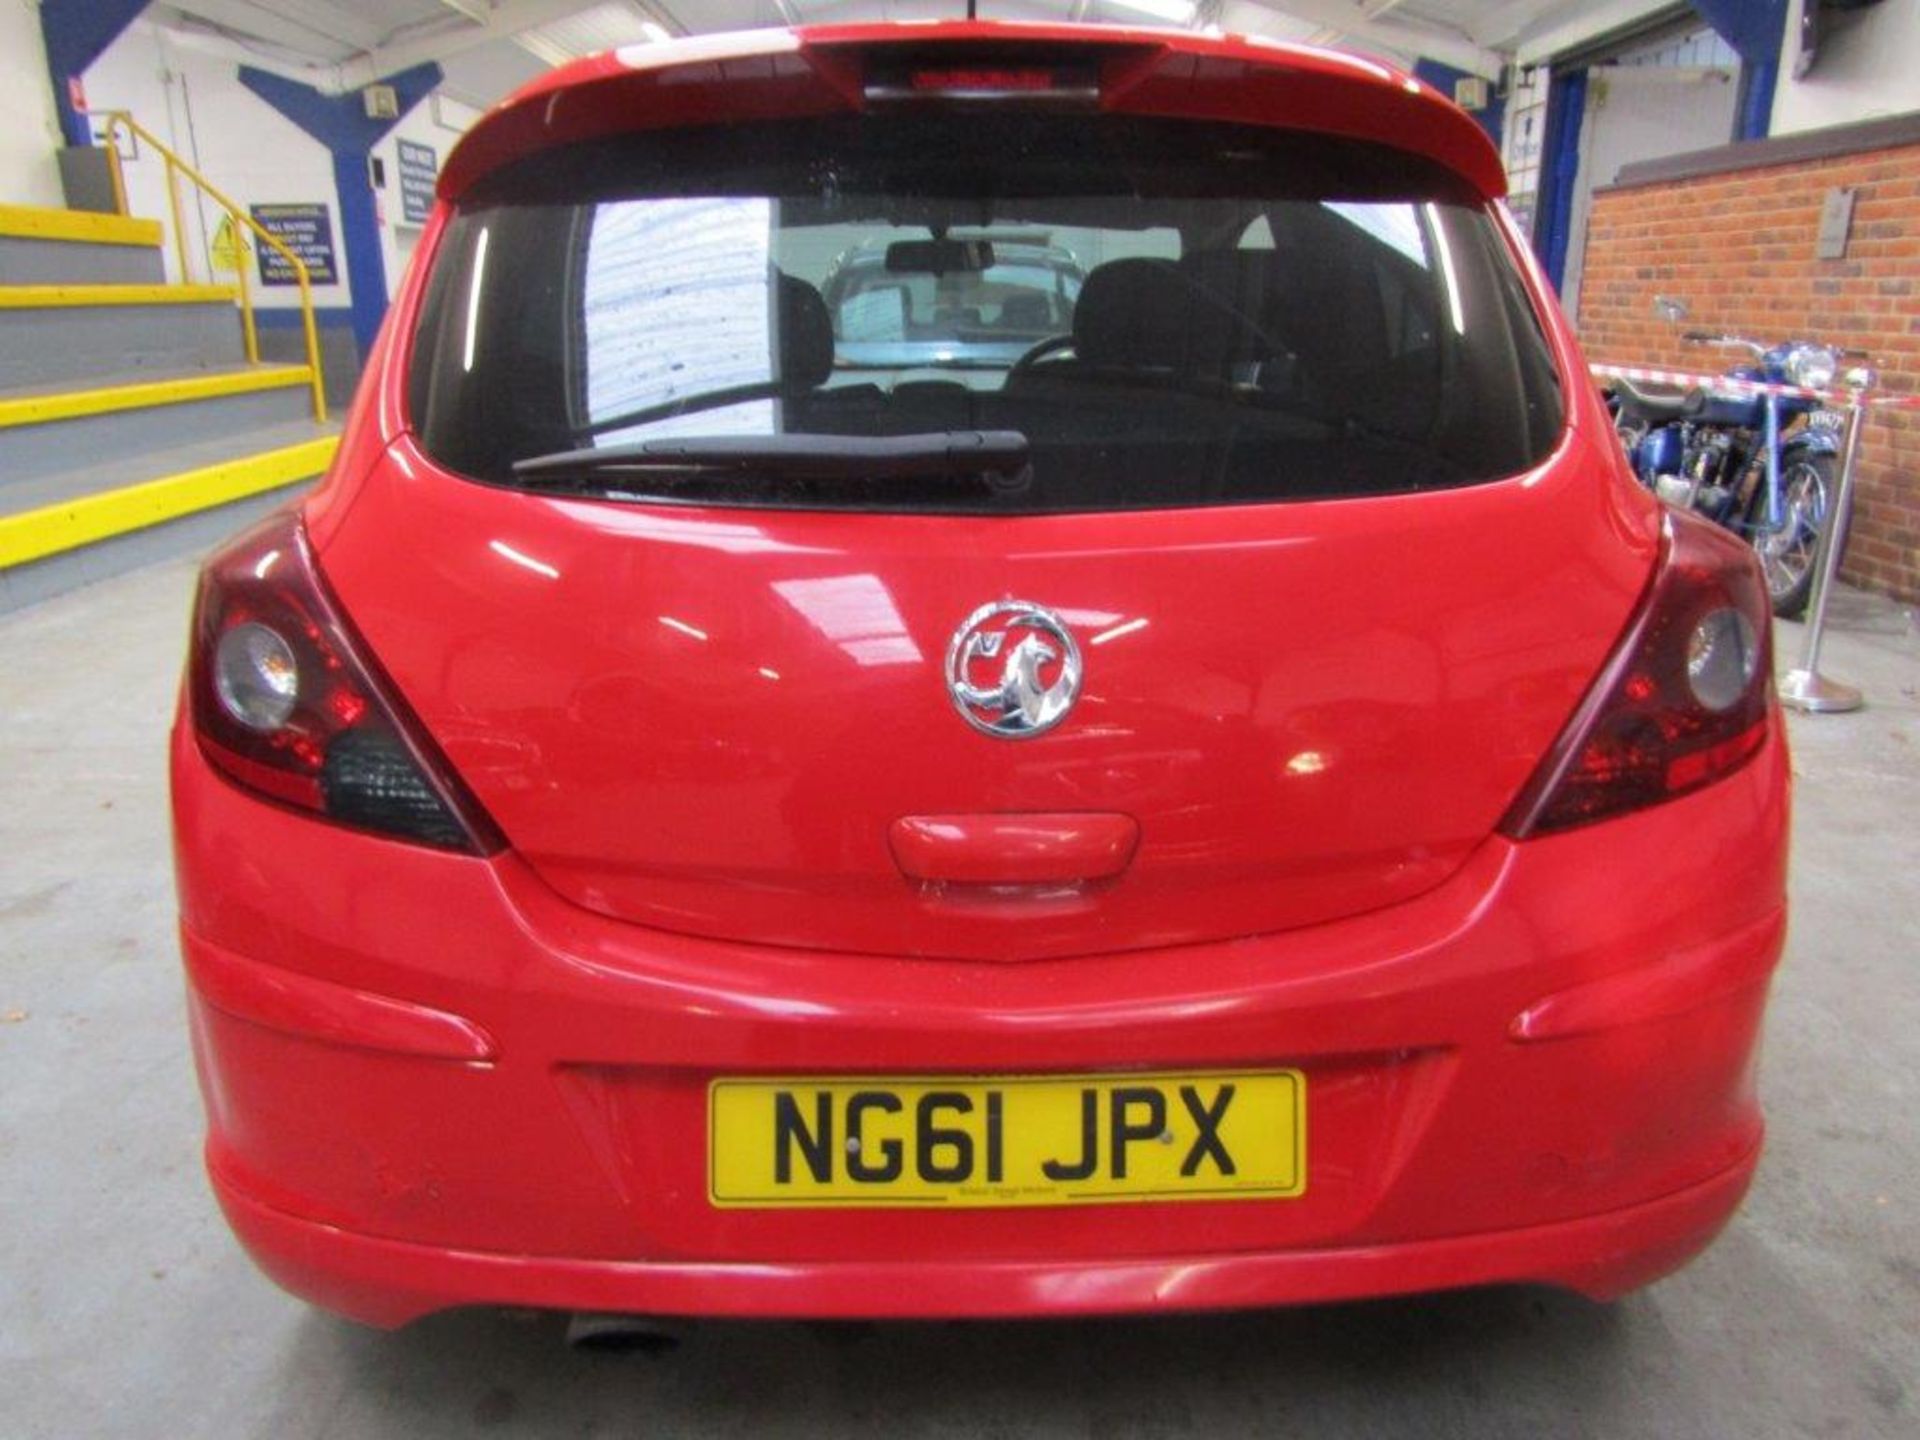 61 12 Vauxhall Corsa Limited Edition - Image 3 of 21